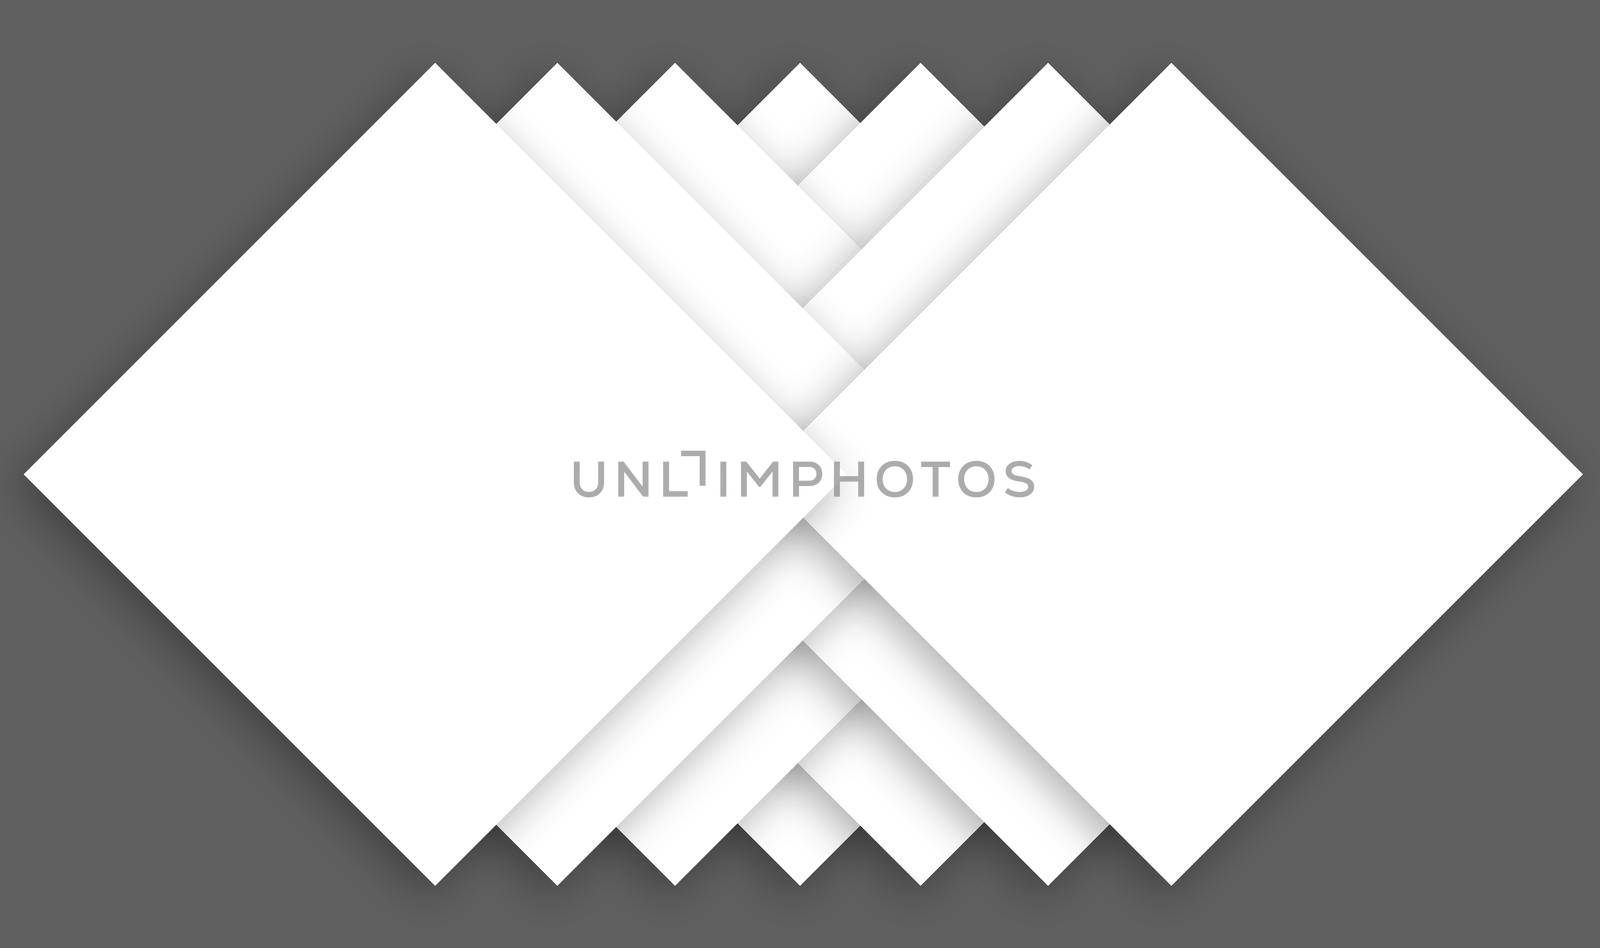 abstract concept design made of squares in center of the image creating design by overlapping on each other in gray isolated background with soft shadow, layers image ready to print for cards, invitation, design print by tabishere